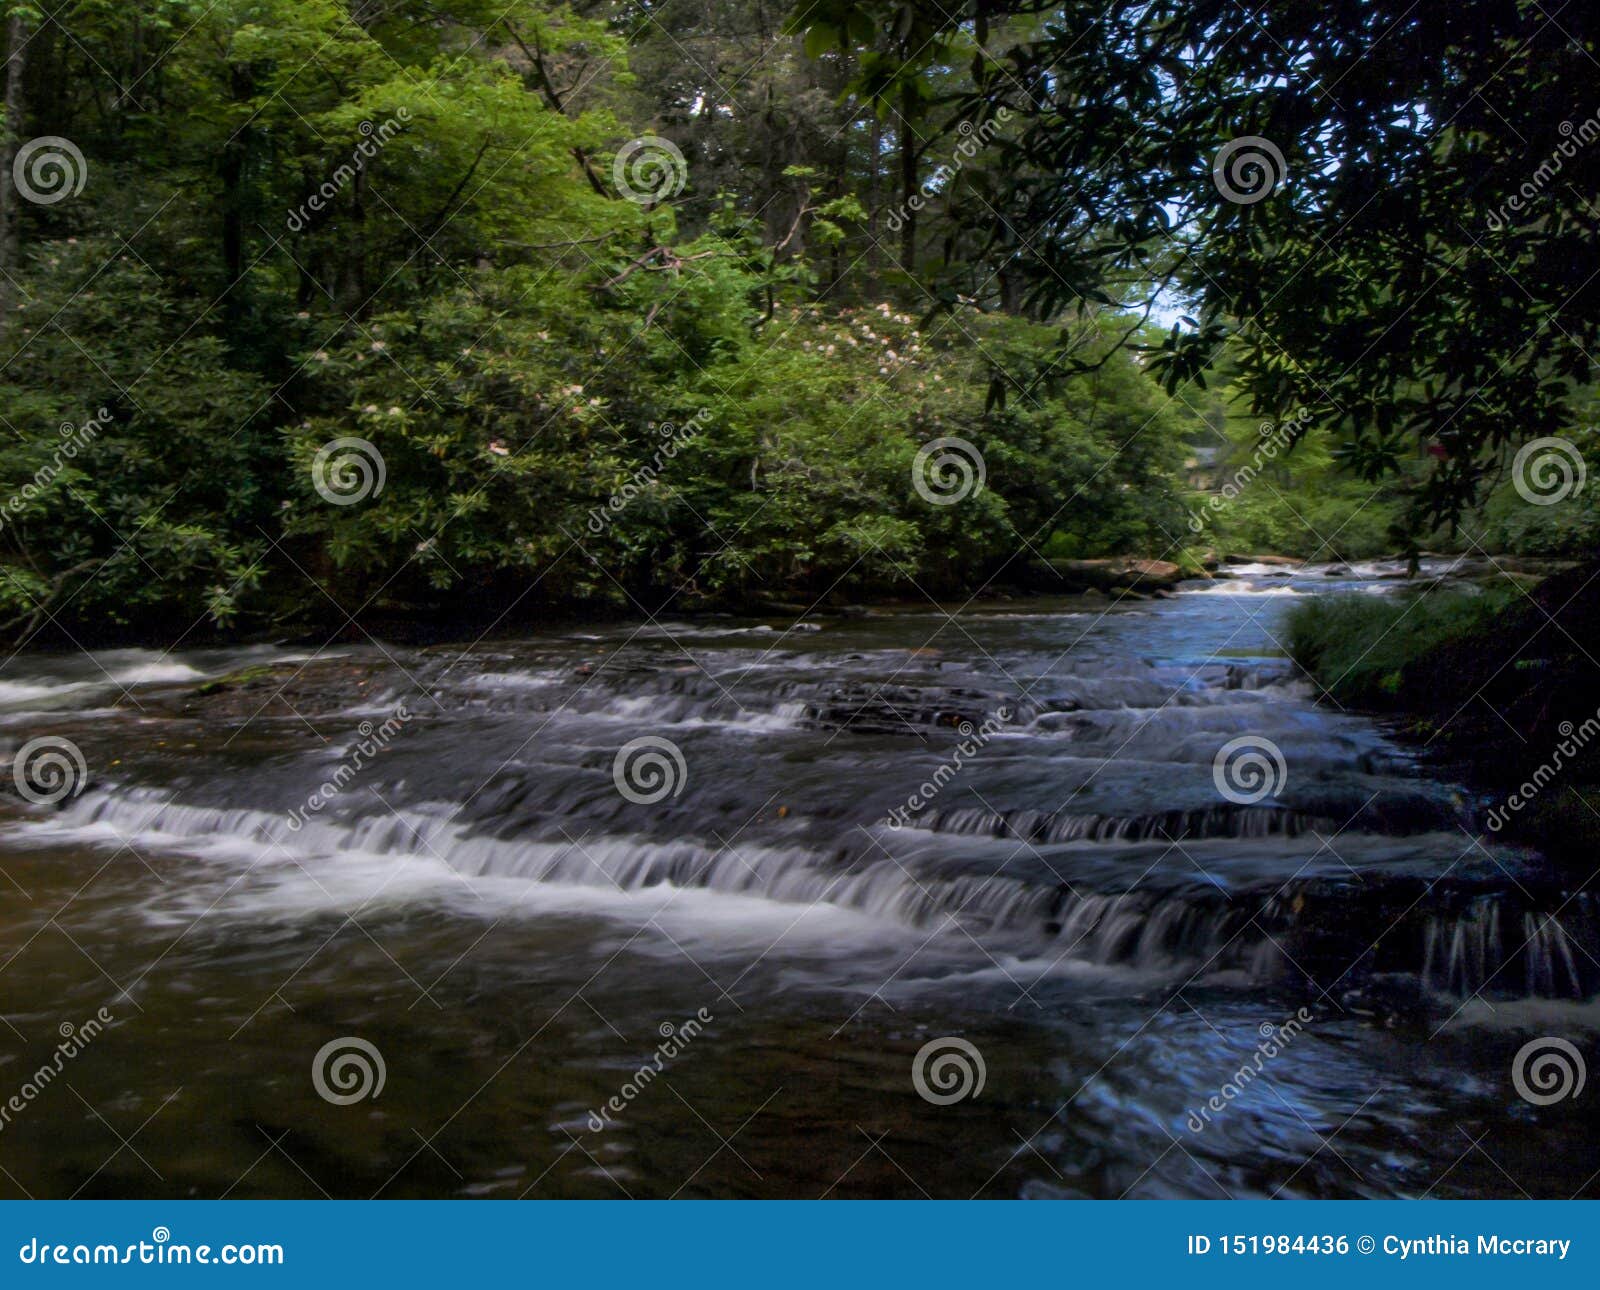 919 Brevard Photos Free Royalty Free Stock Photos From Dreamstime